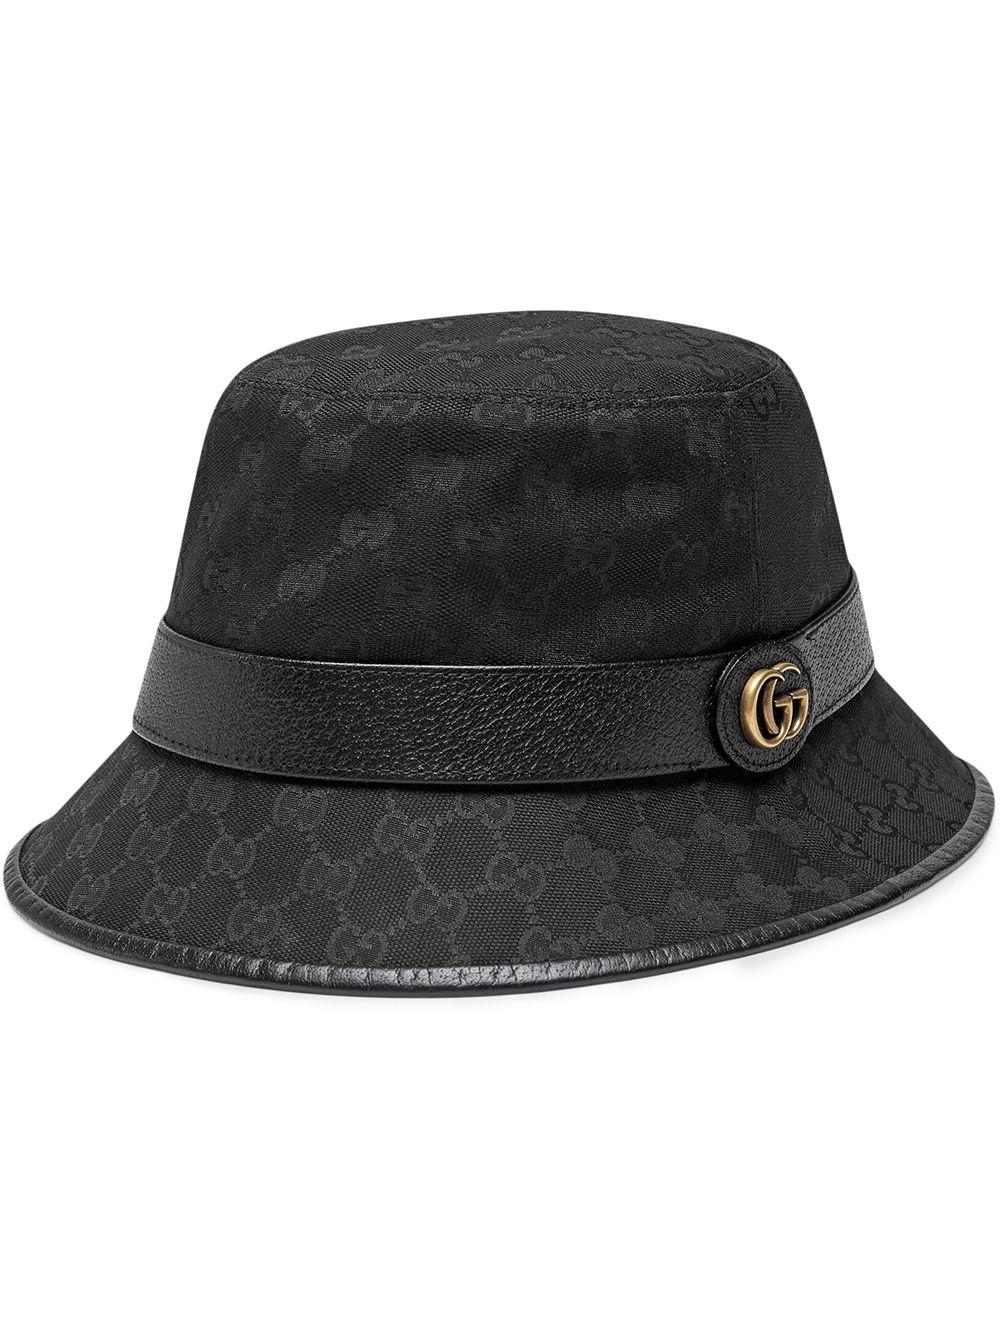 Gucci GG Canvas Bucket Hat in Black for Men - Lyst